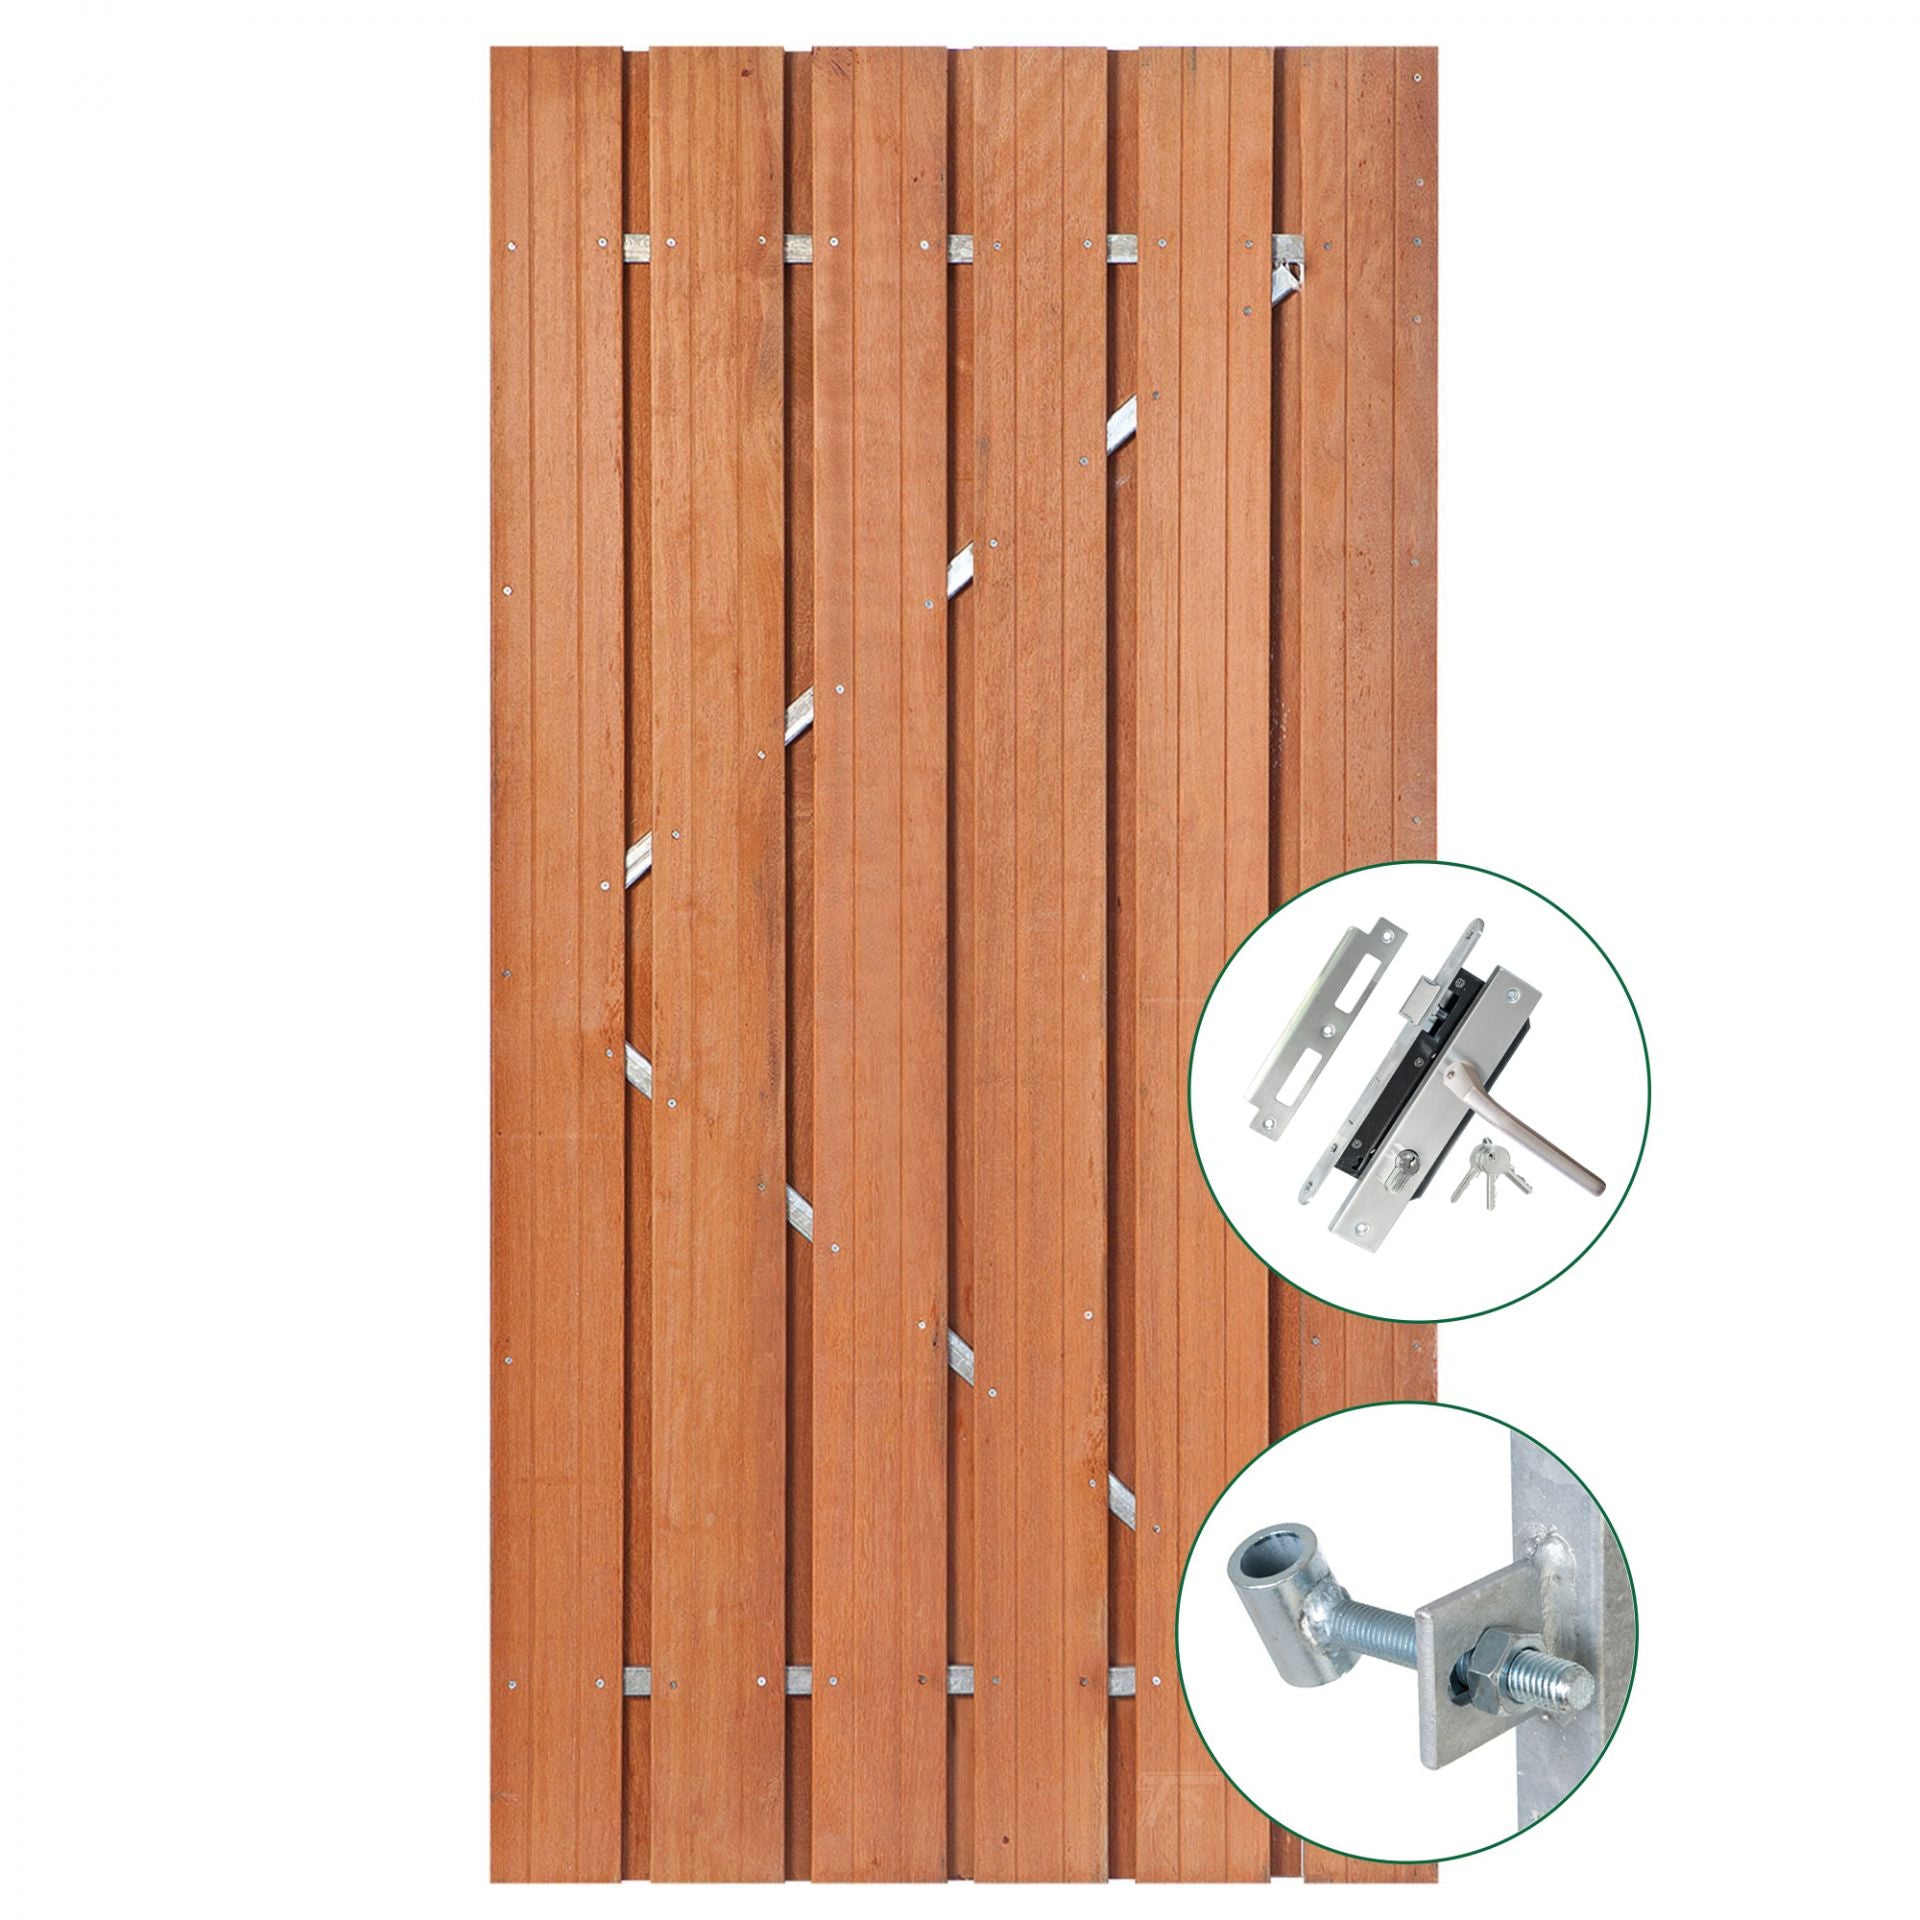 Backyard Galvanized Door Frame Kit with Lock Body Cut-out (40